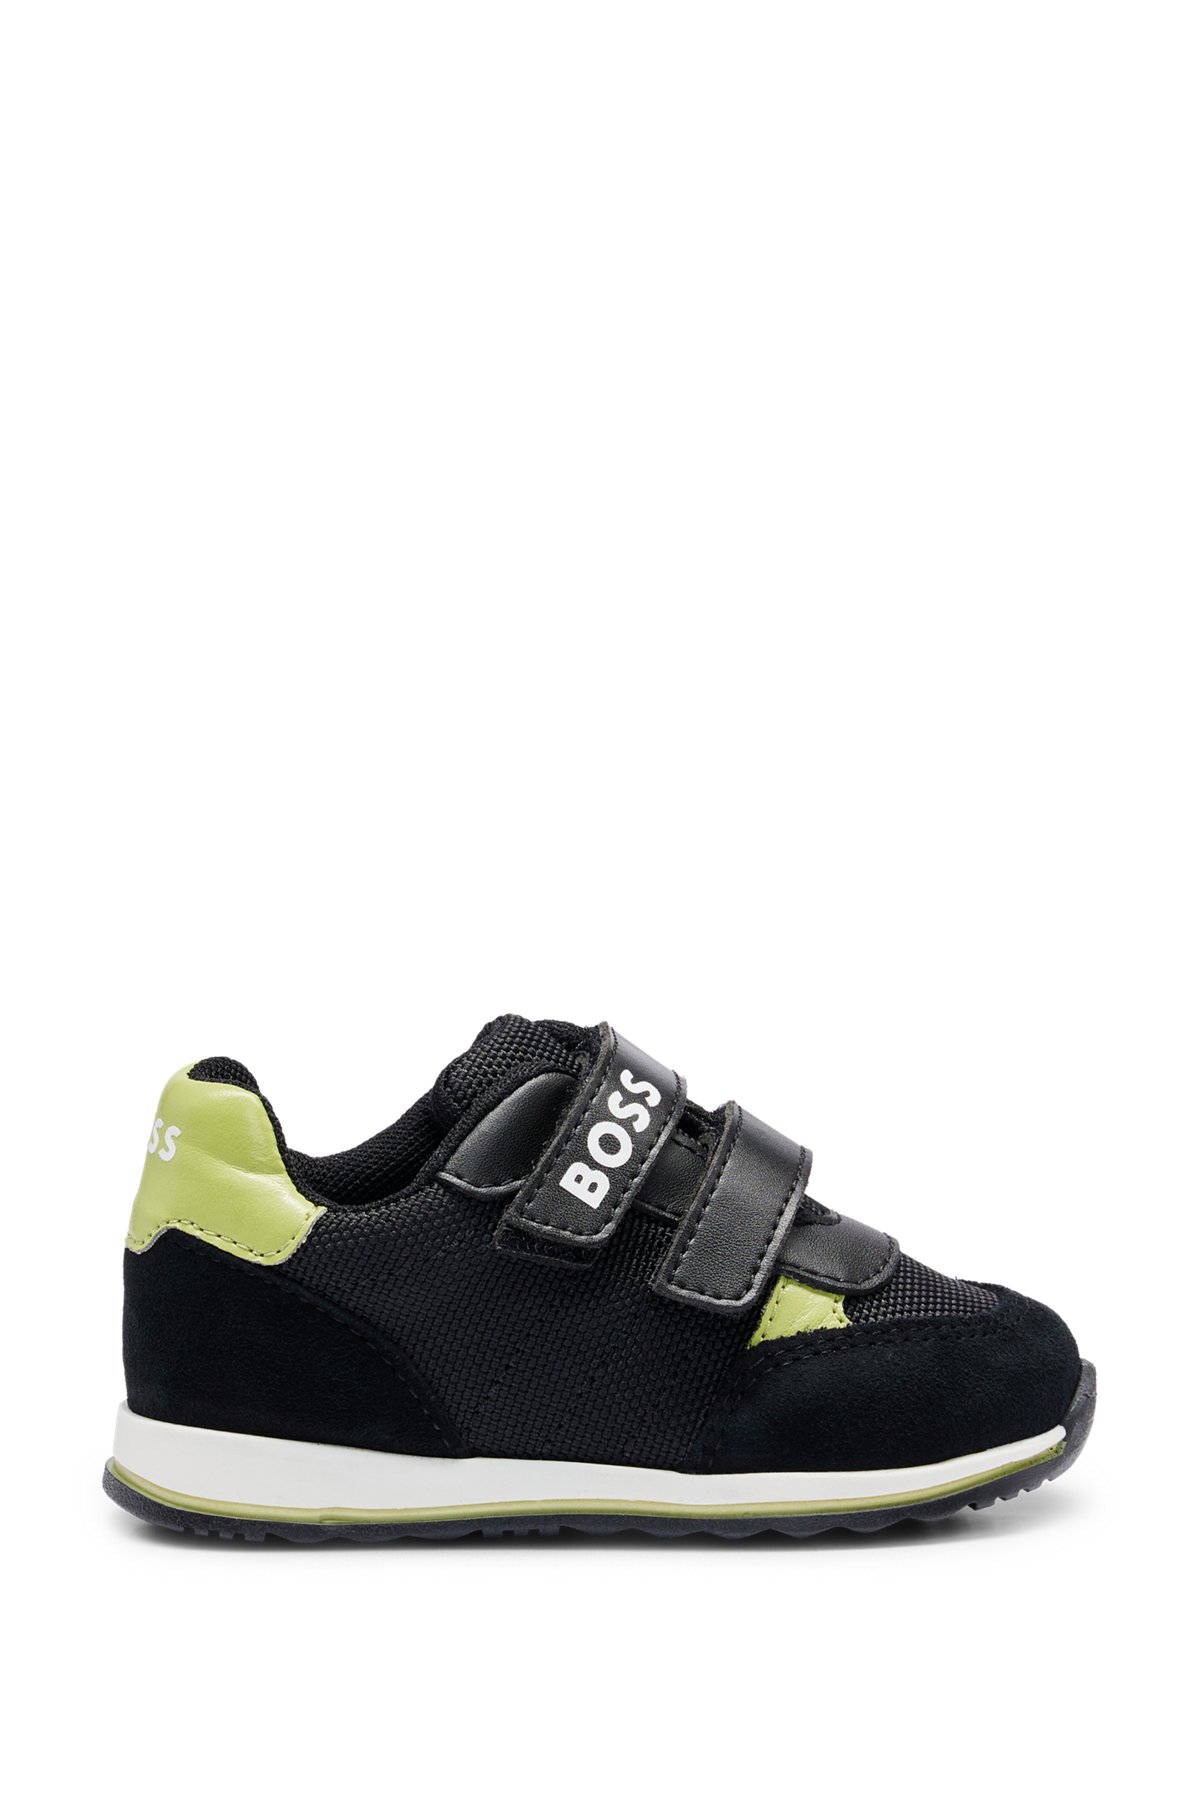 Kids' trainers with touch closures and logo details, Black